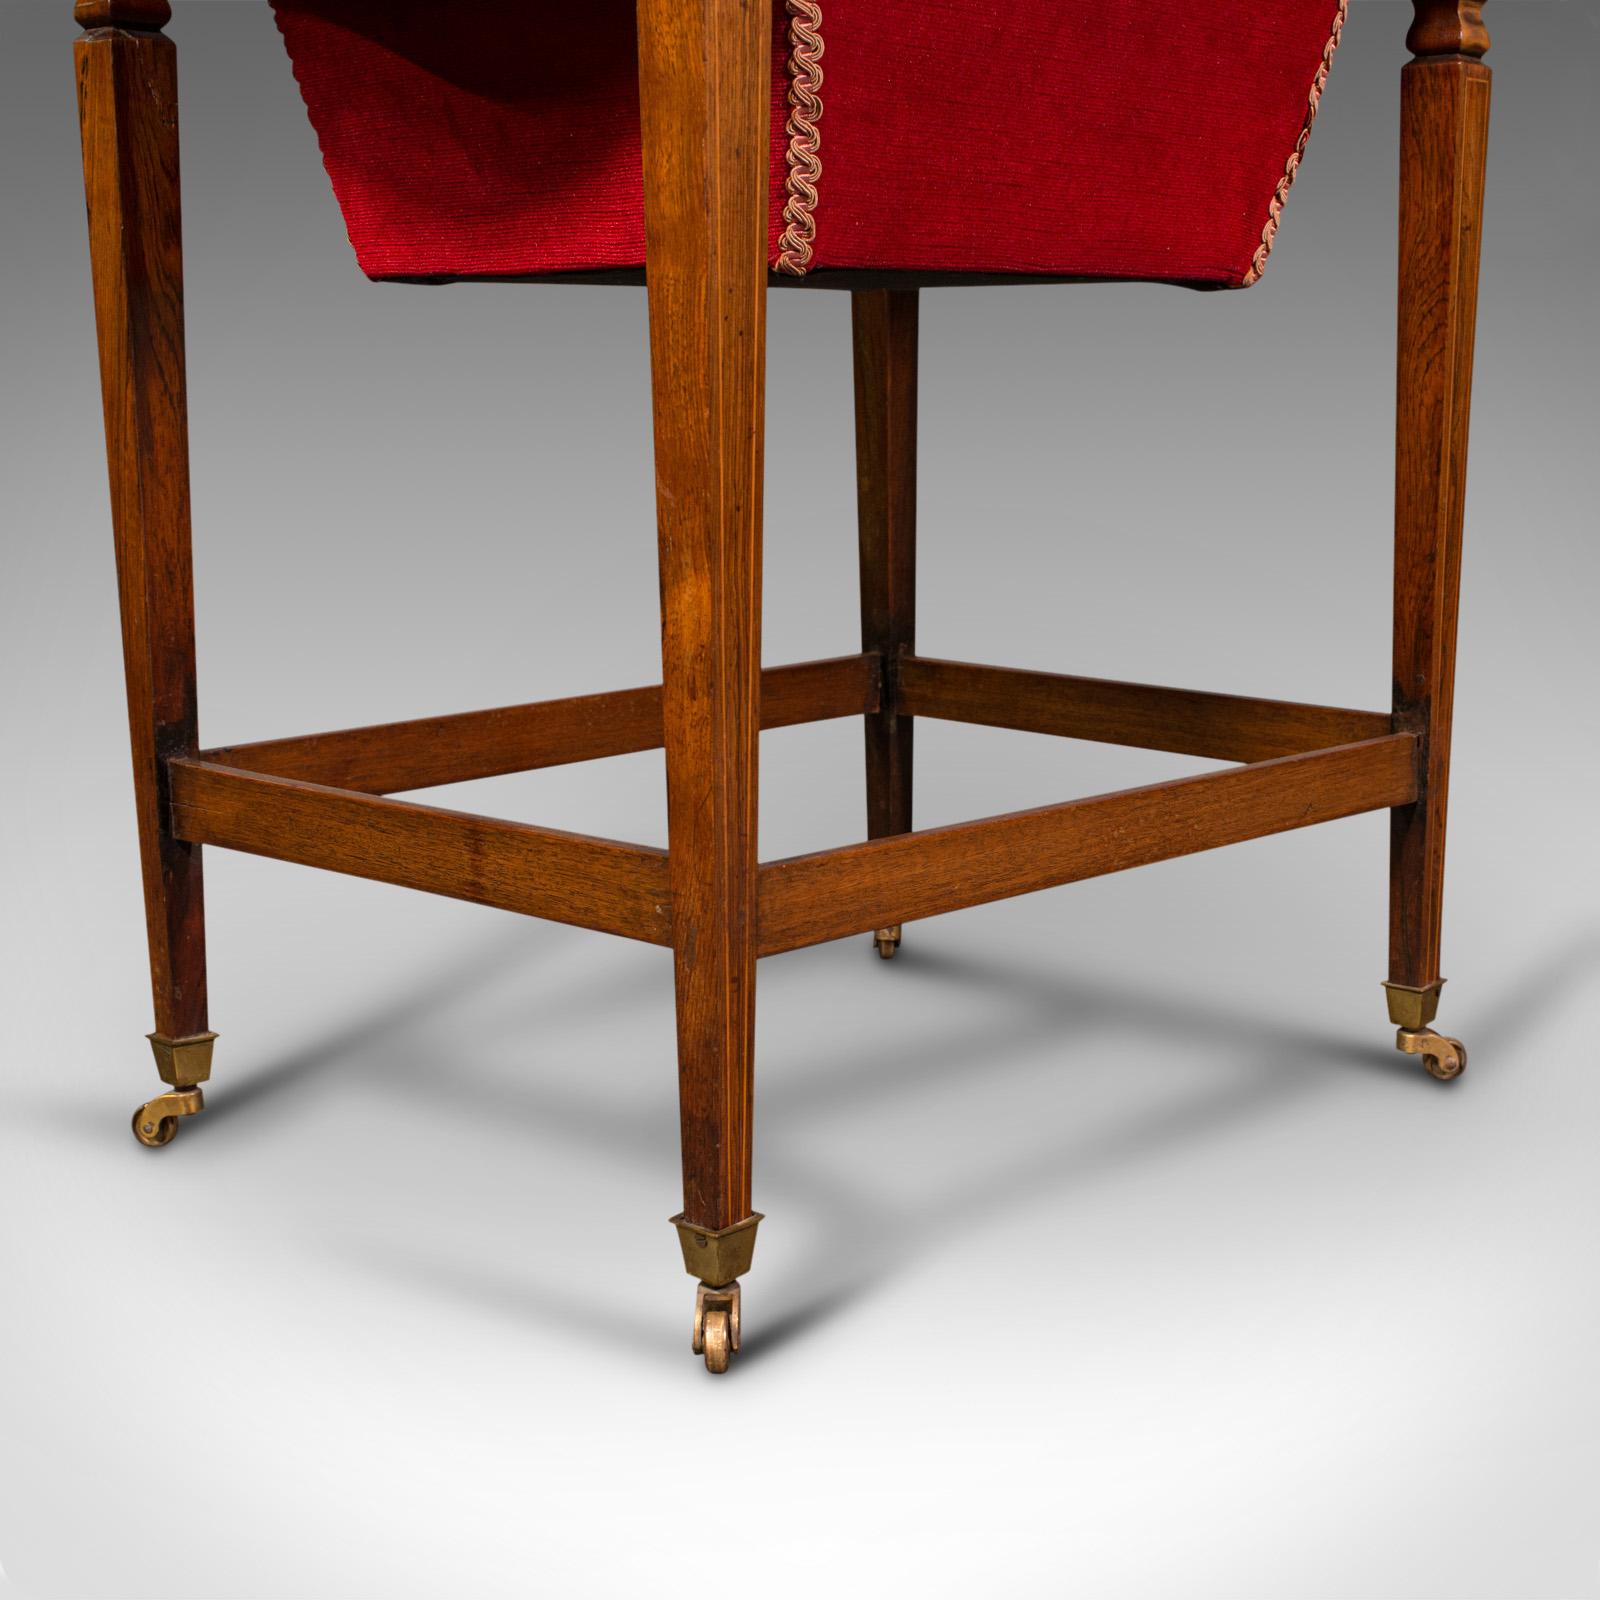 Antique Drop Leaf Sewing Table, English, Rosewood, Side, Lamp, Regency, C.1820 For Sale 3